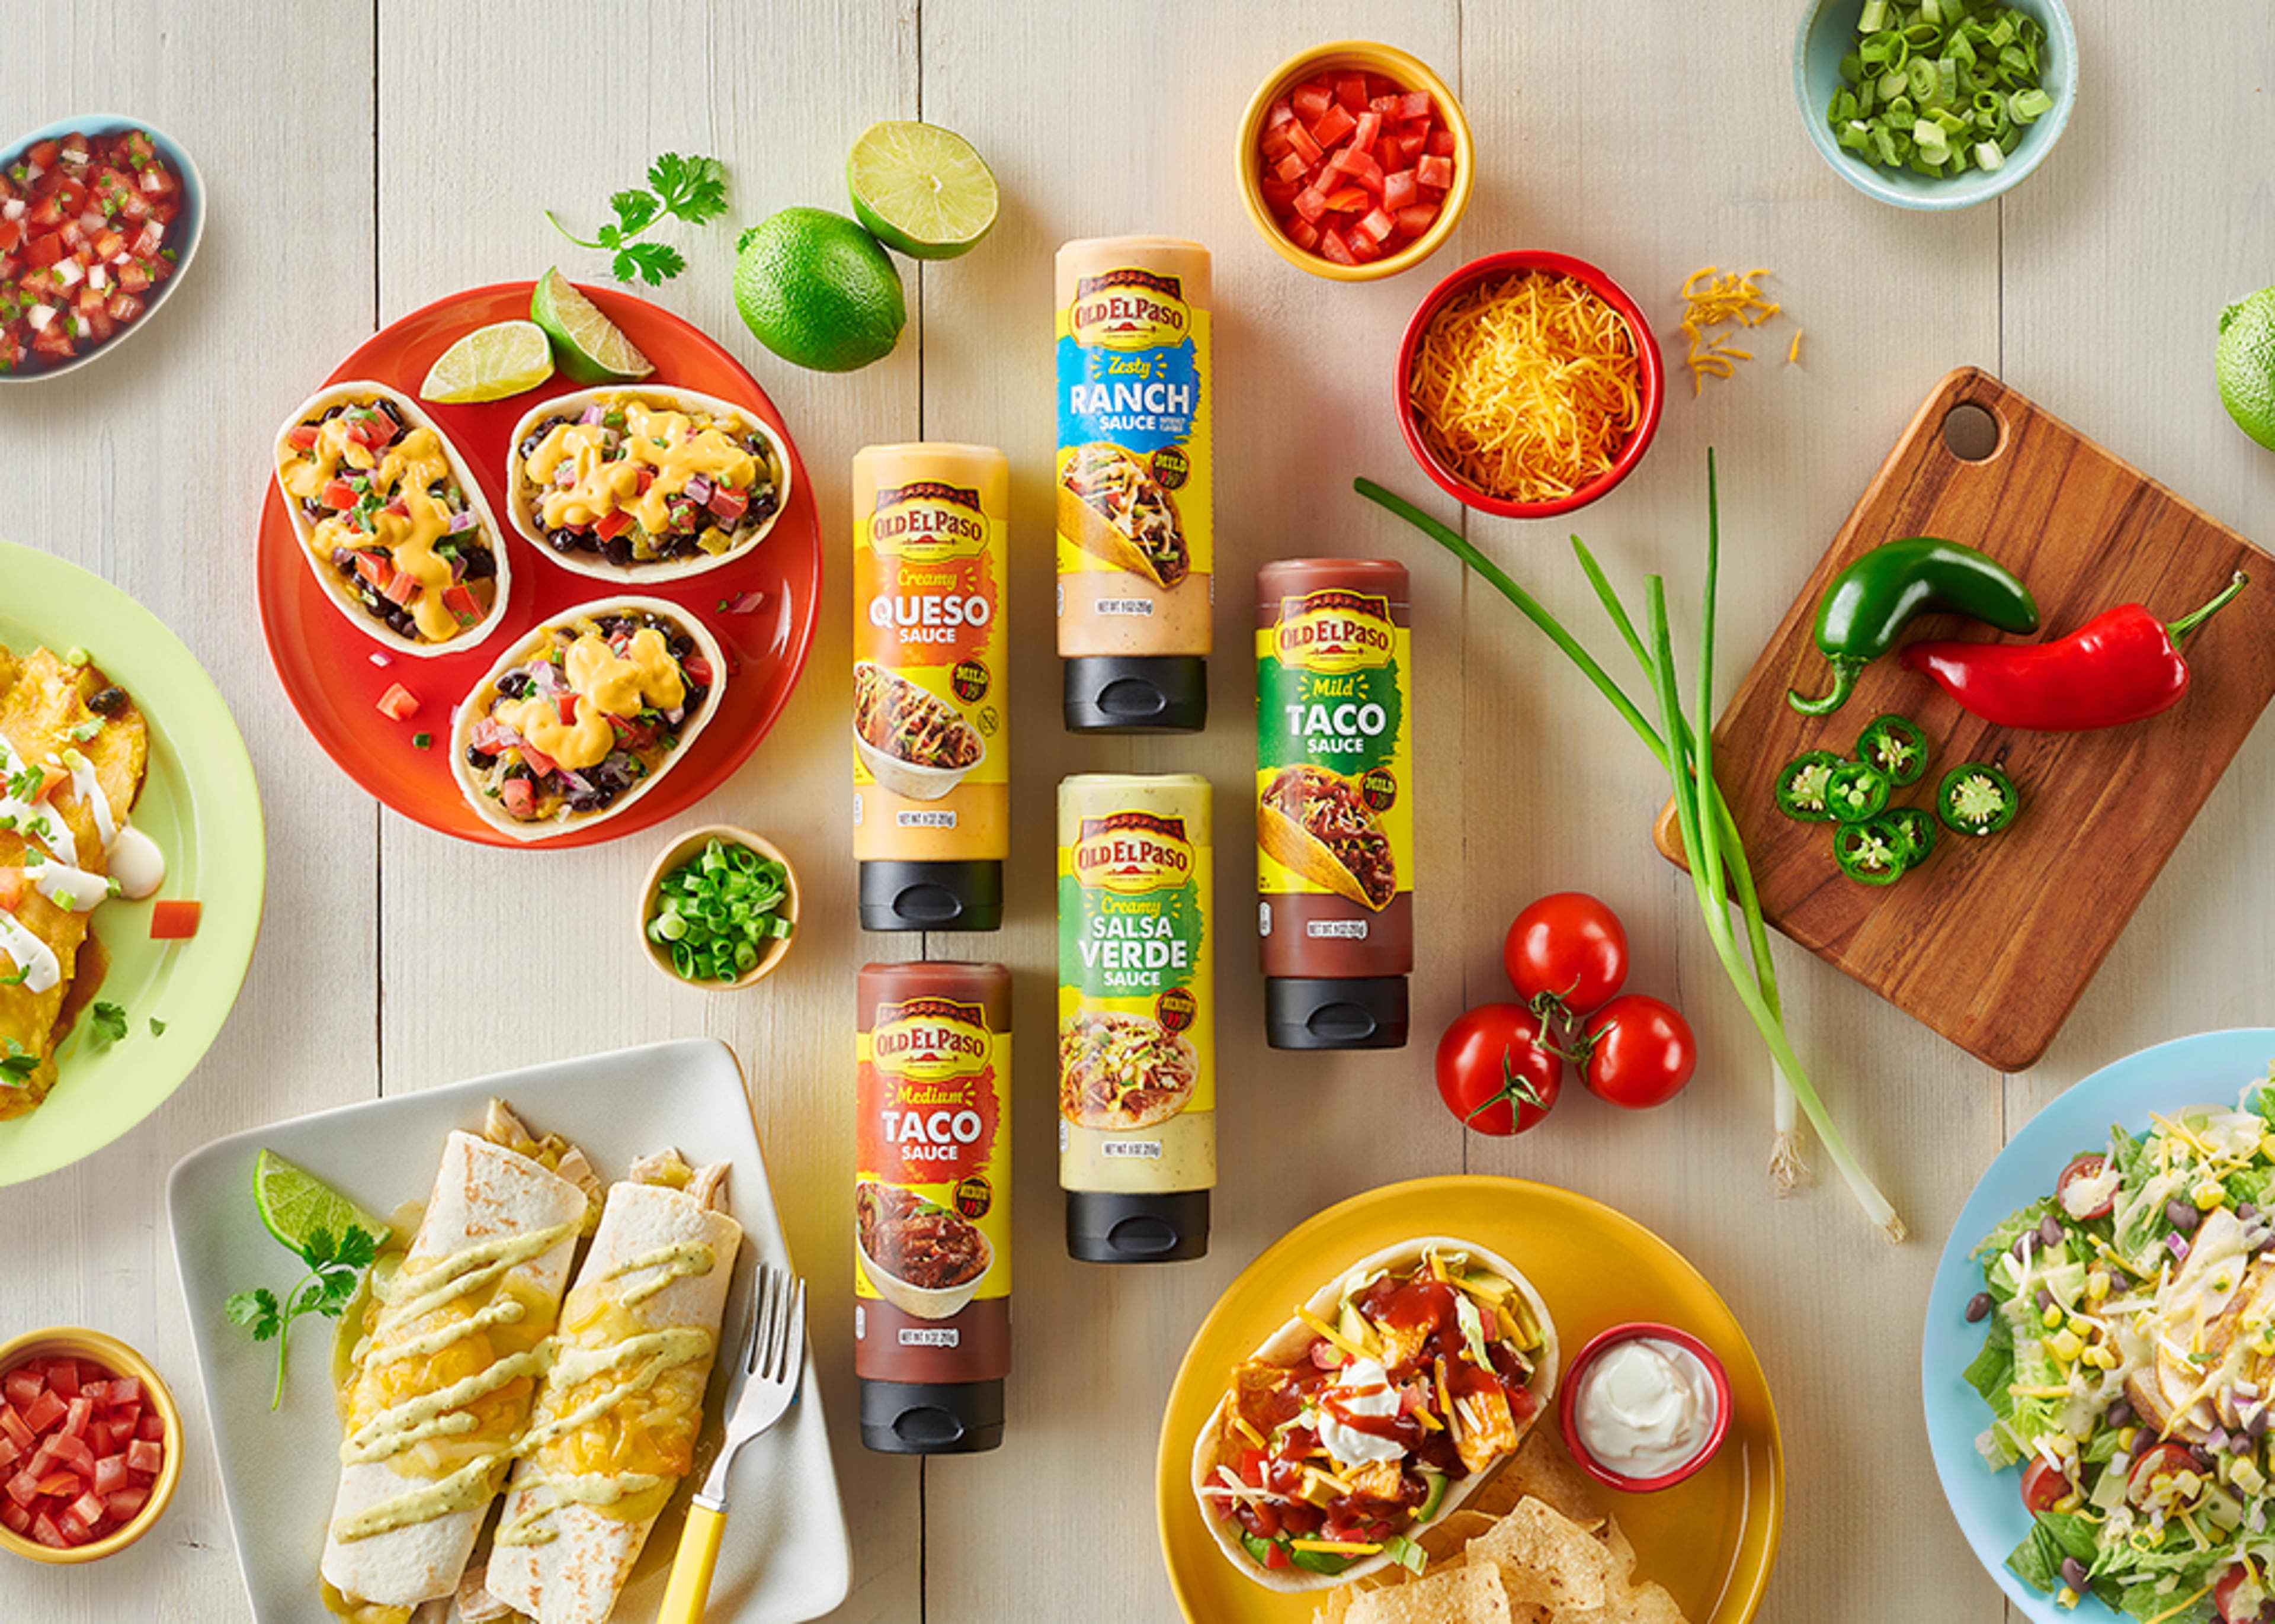 Variety of Old el paso's sauces